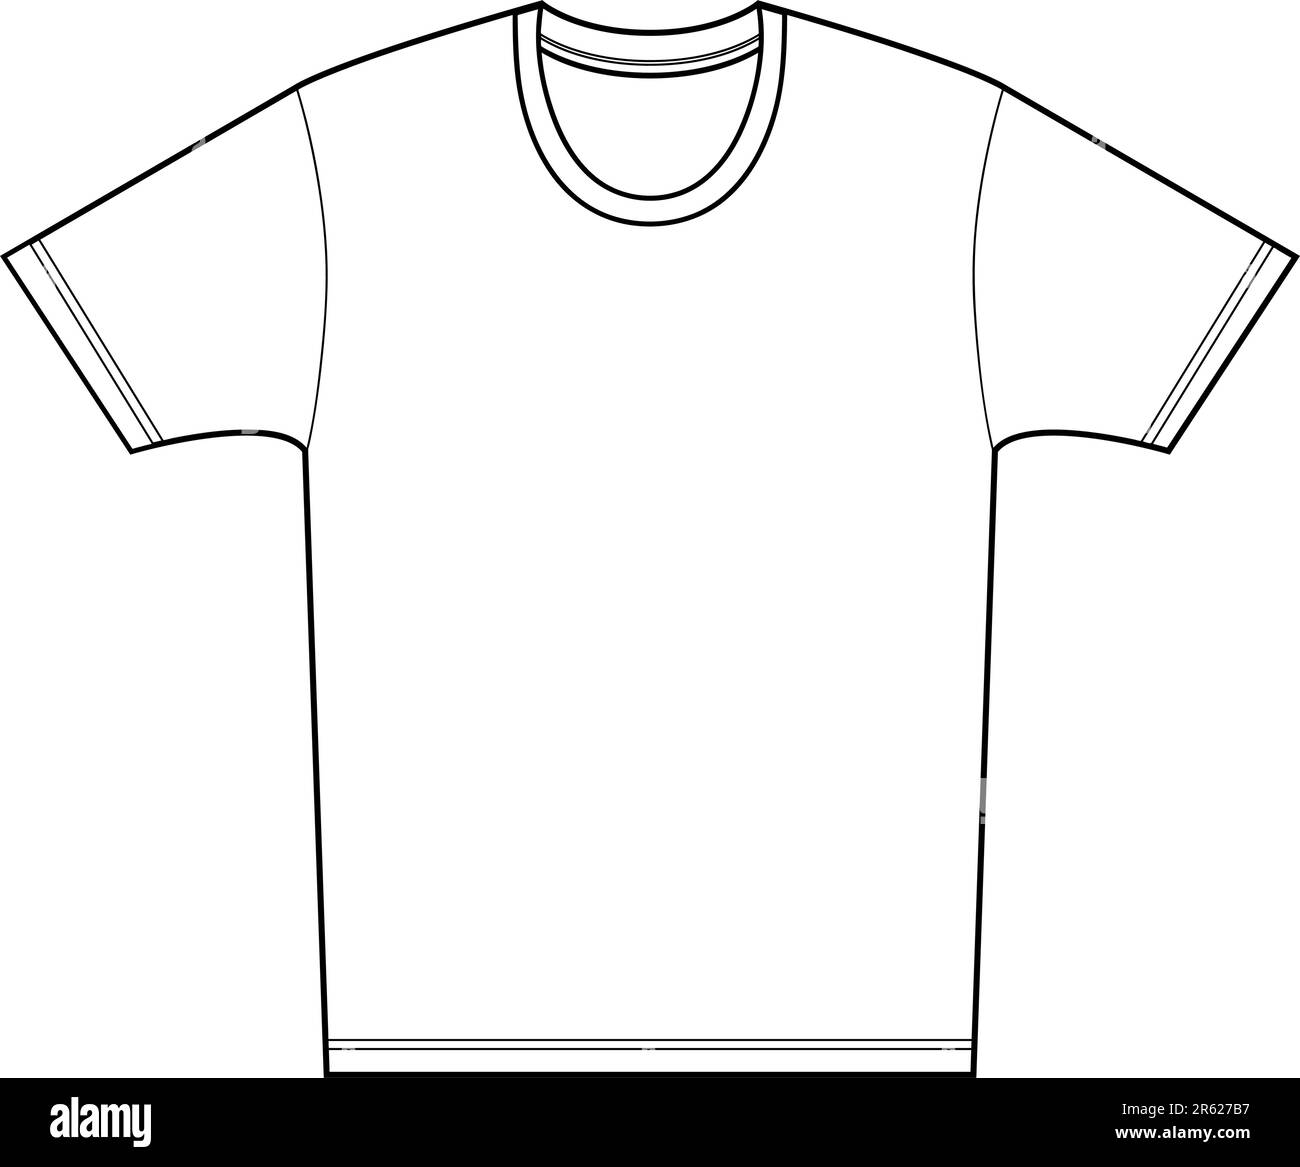 Tee shirt isolated on a white background. Stock Vector